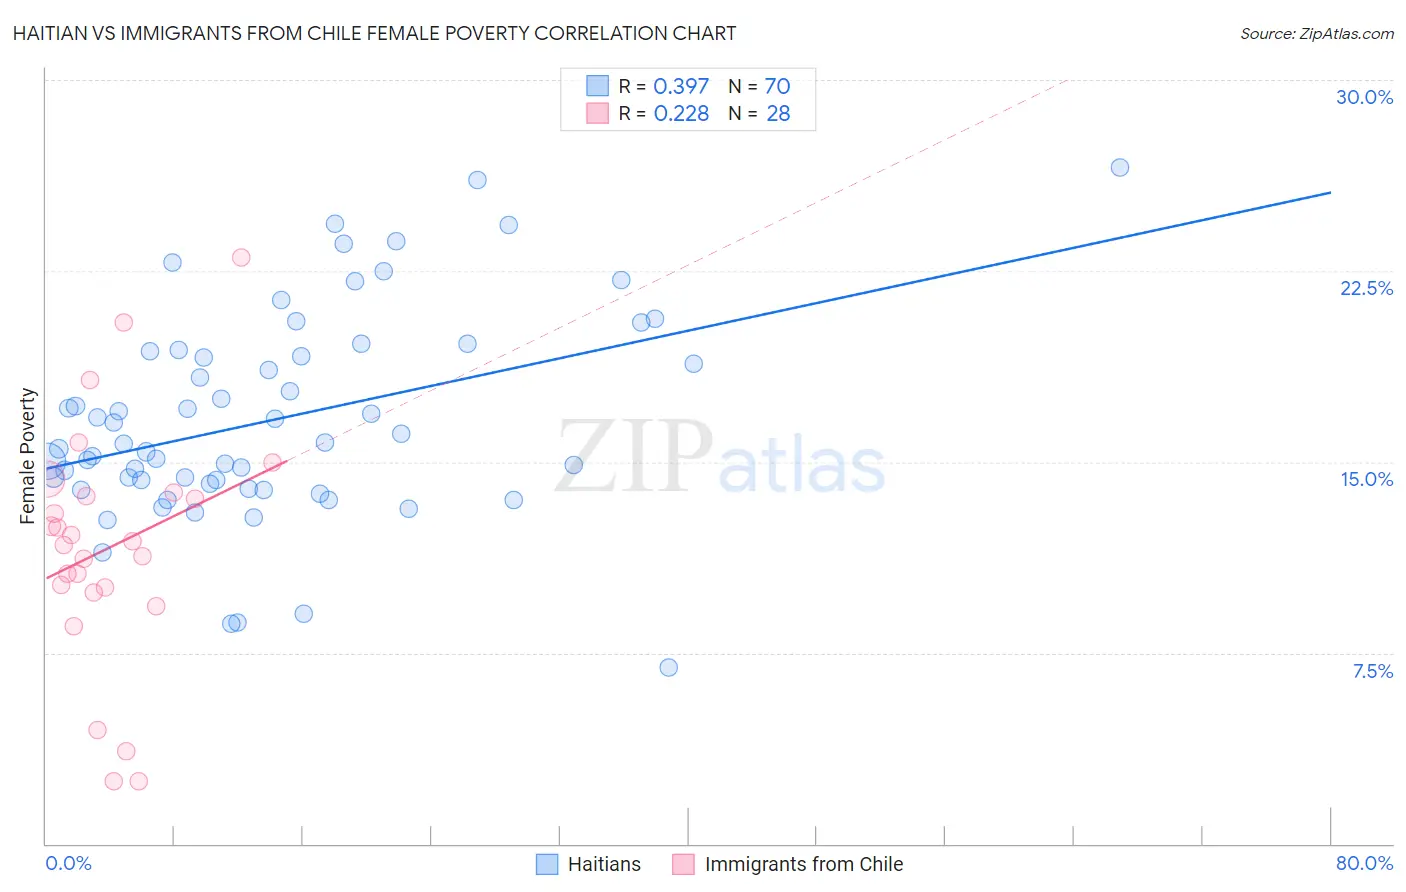 Haitian vs Immigrants from Chile Female Poverty